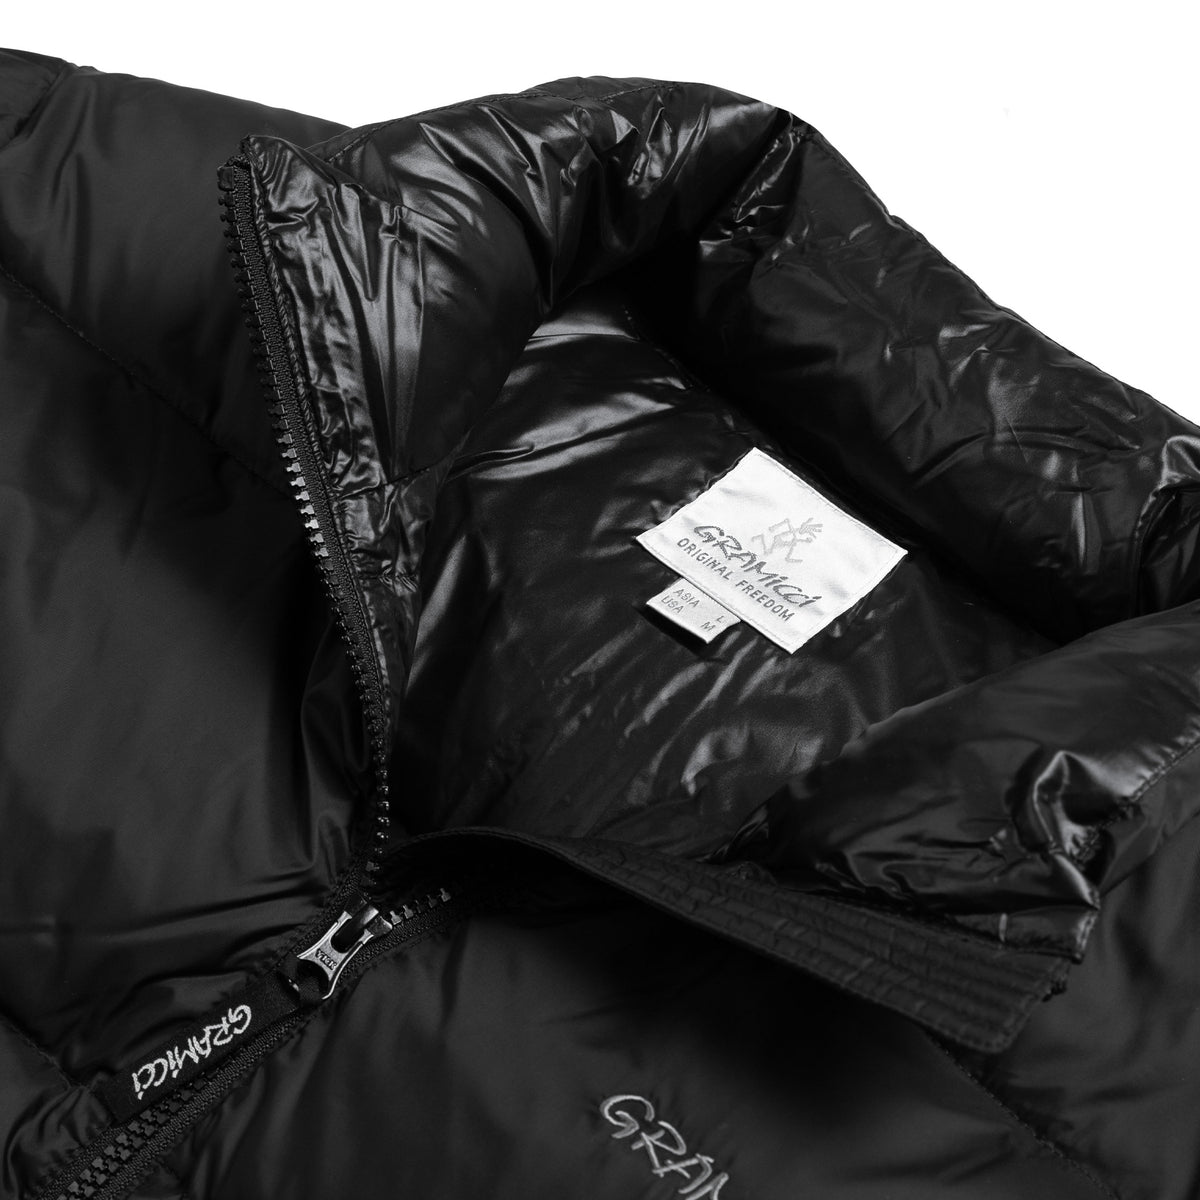 Gramicci Down Puffer Jacket » Buy online now!